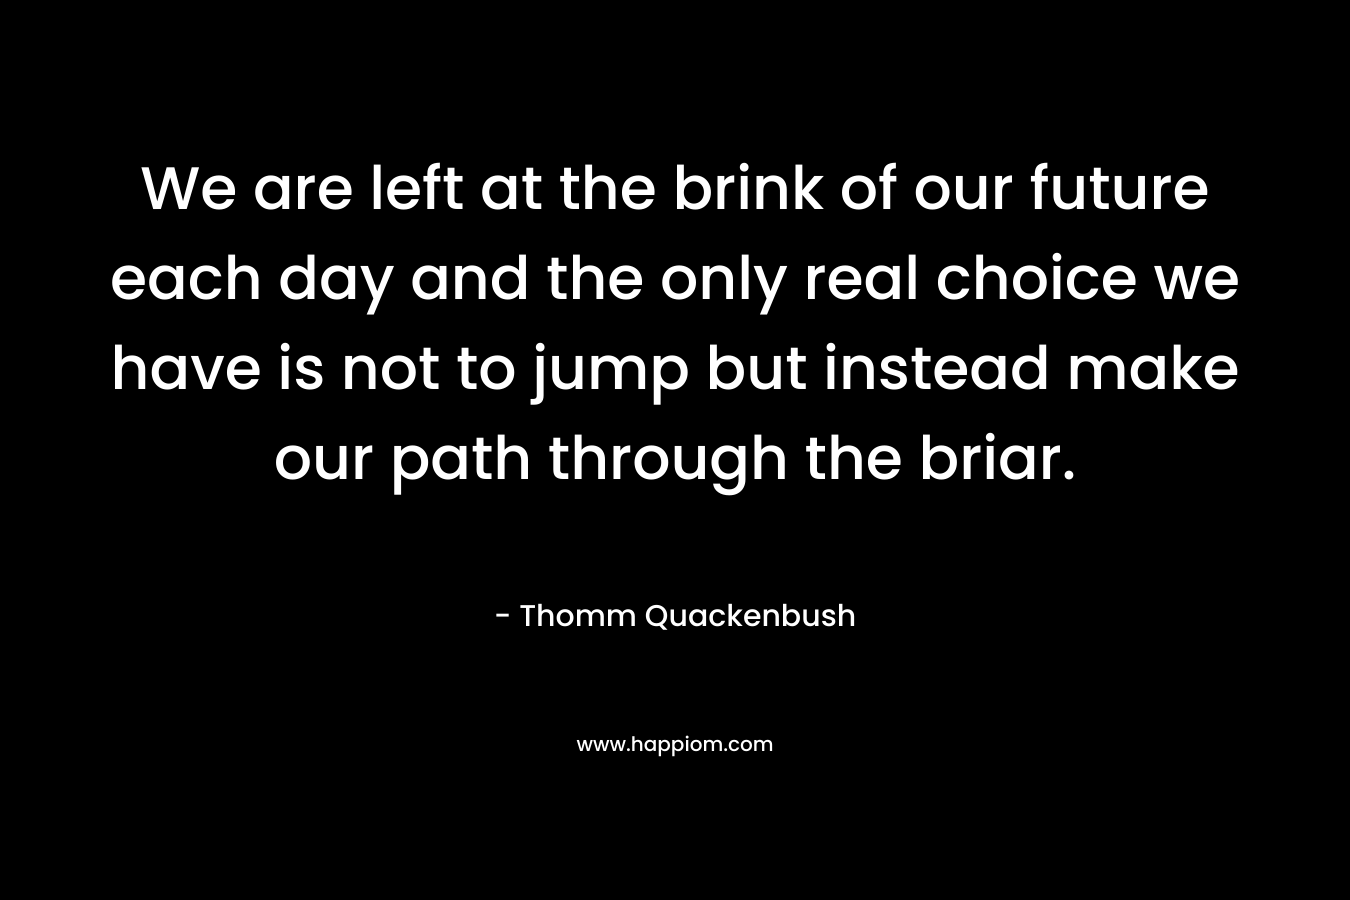 We are left at the brink of our future each day and the only real choice we have is not to jump but instead make our path through the briar. – Thomm Quackenbush